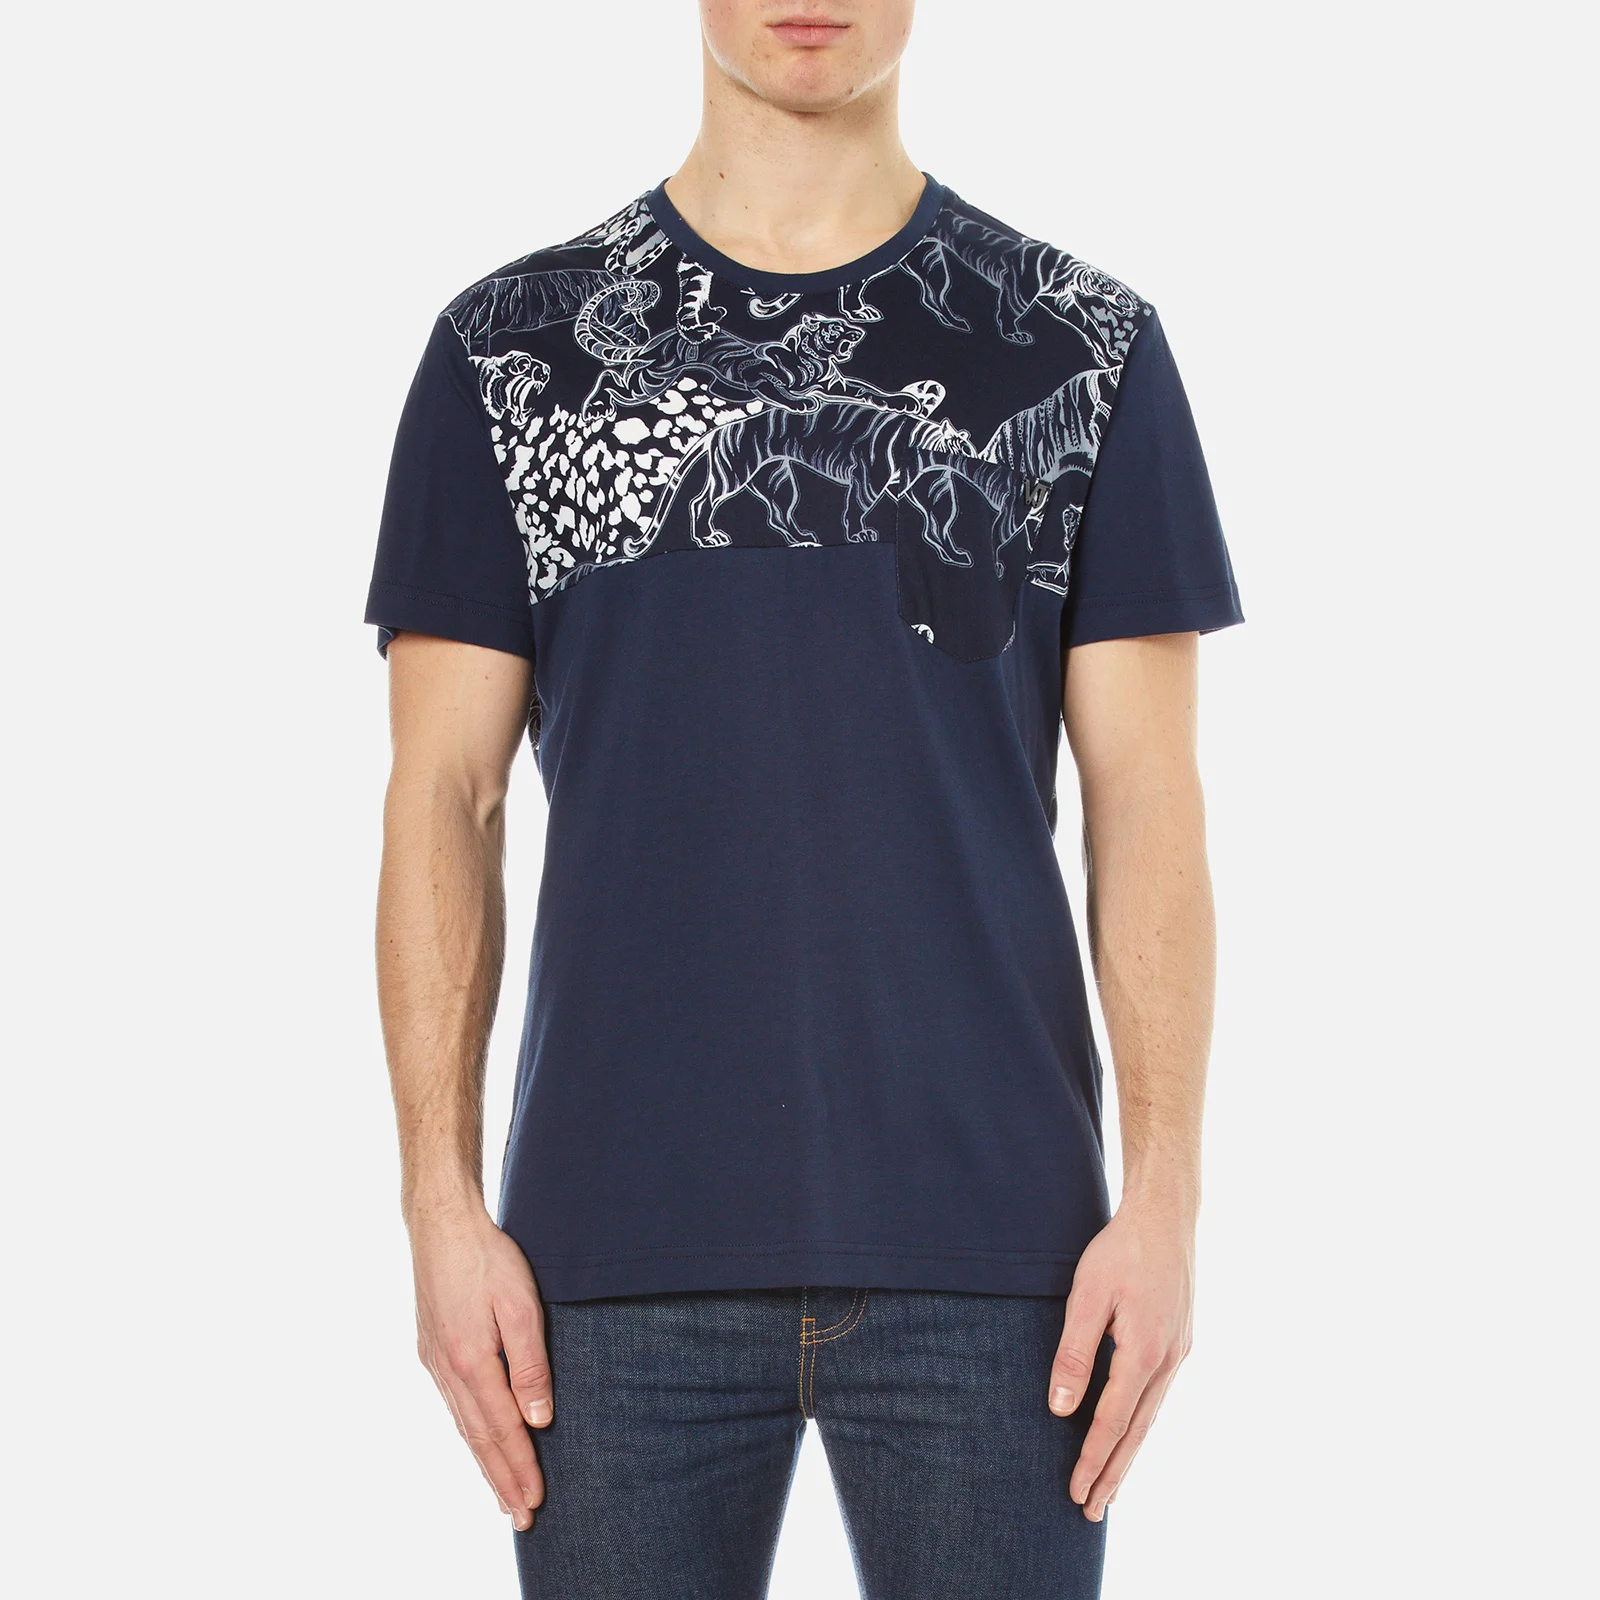 Versace Collection Men's All Over Print T-Shirt - Multi Image 1